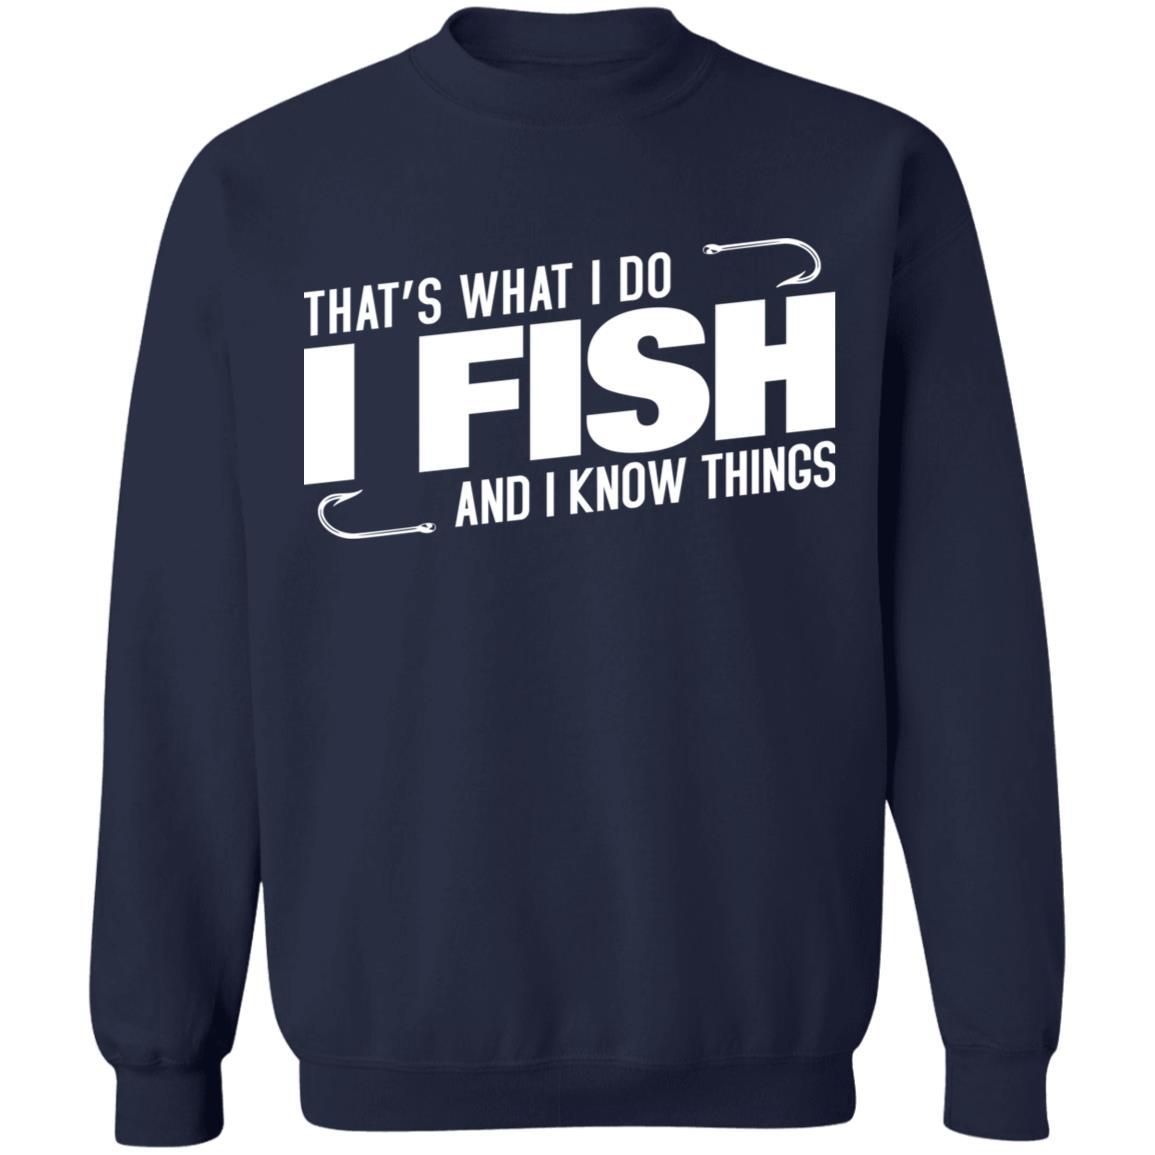 That's what i do i fish and i know things sweatshirt i navy